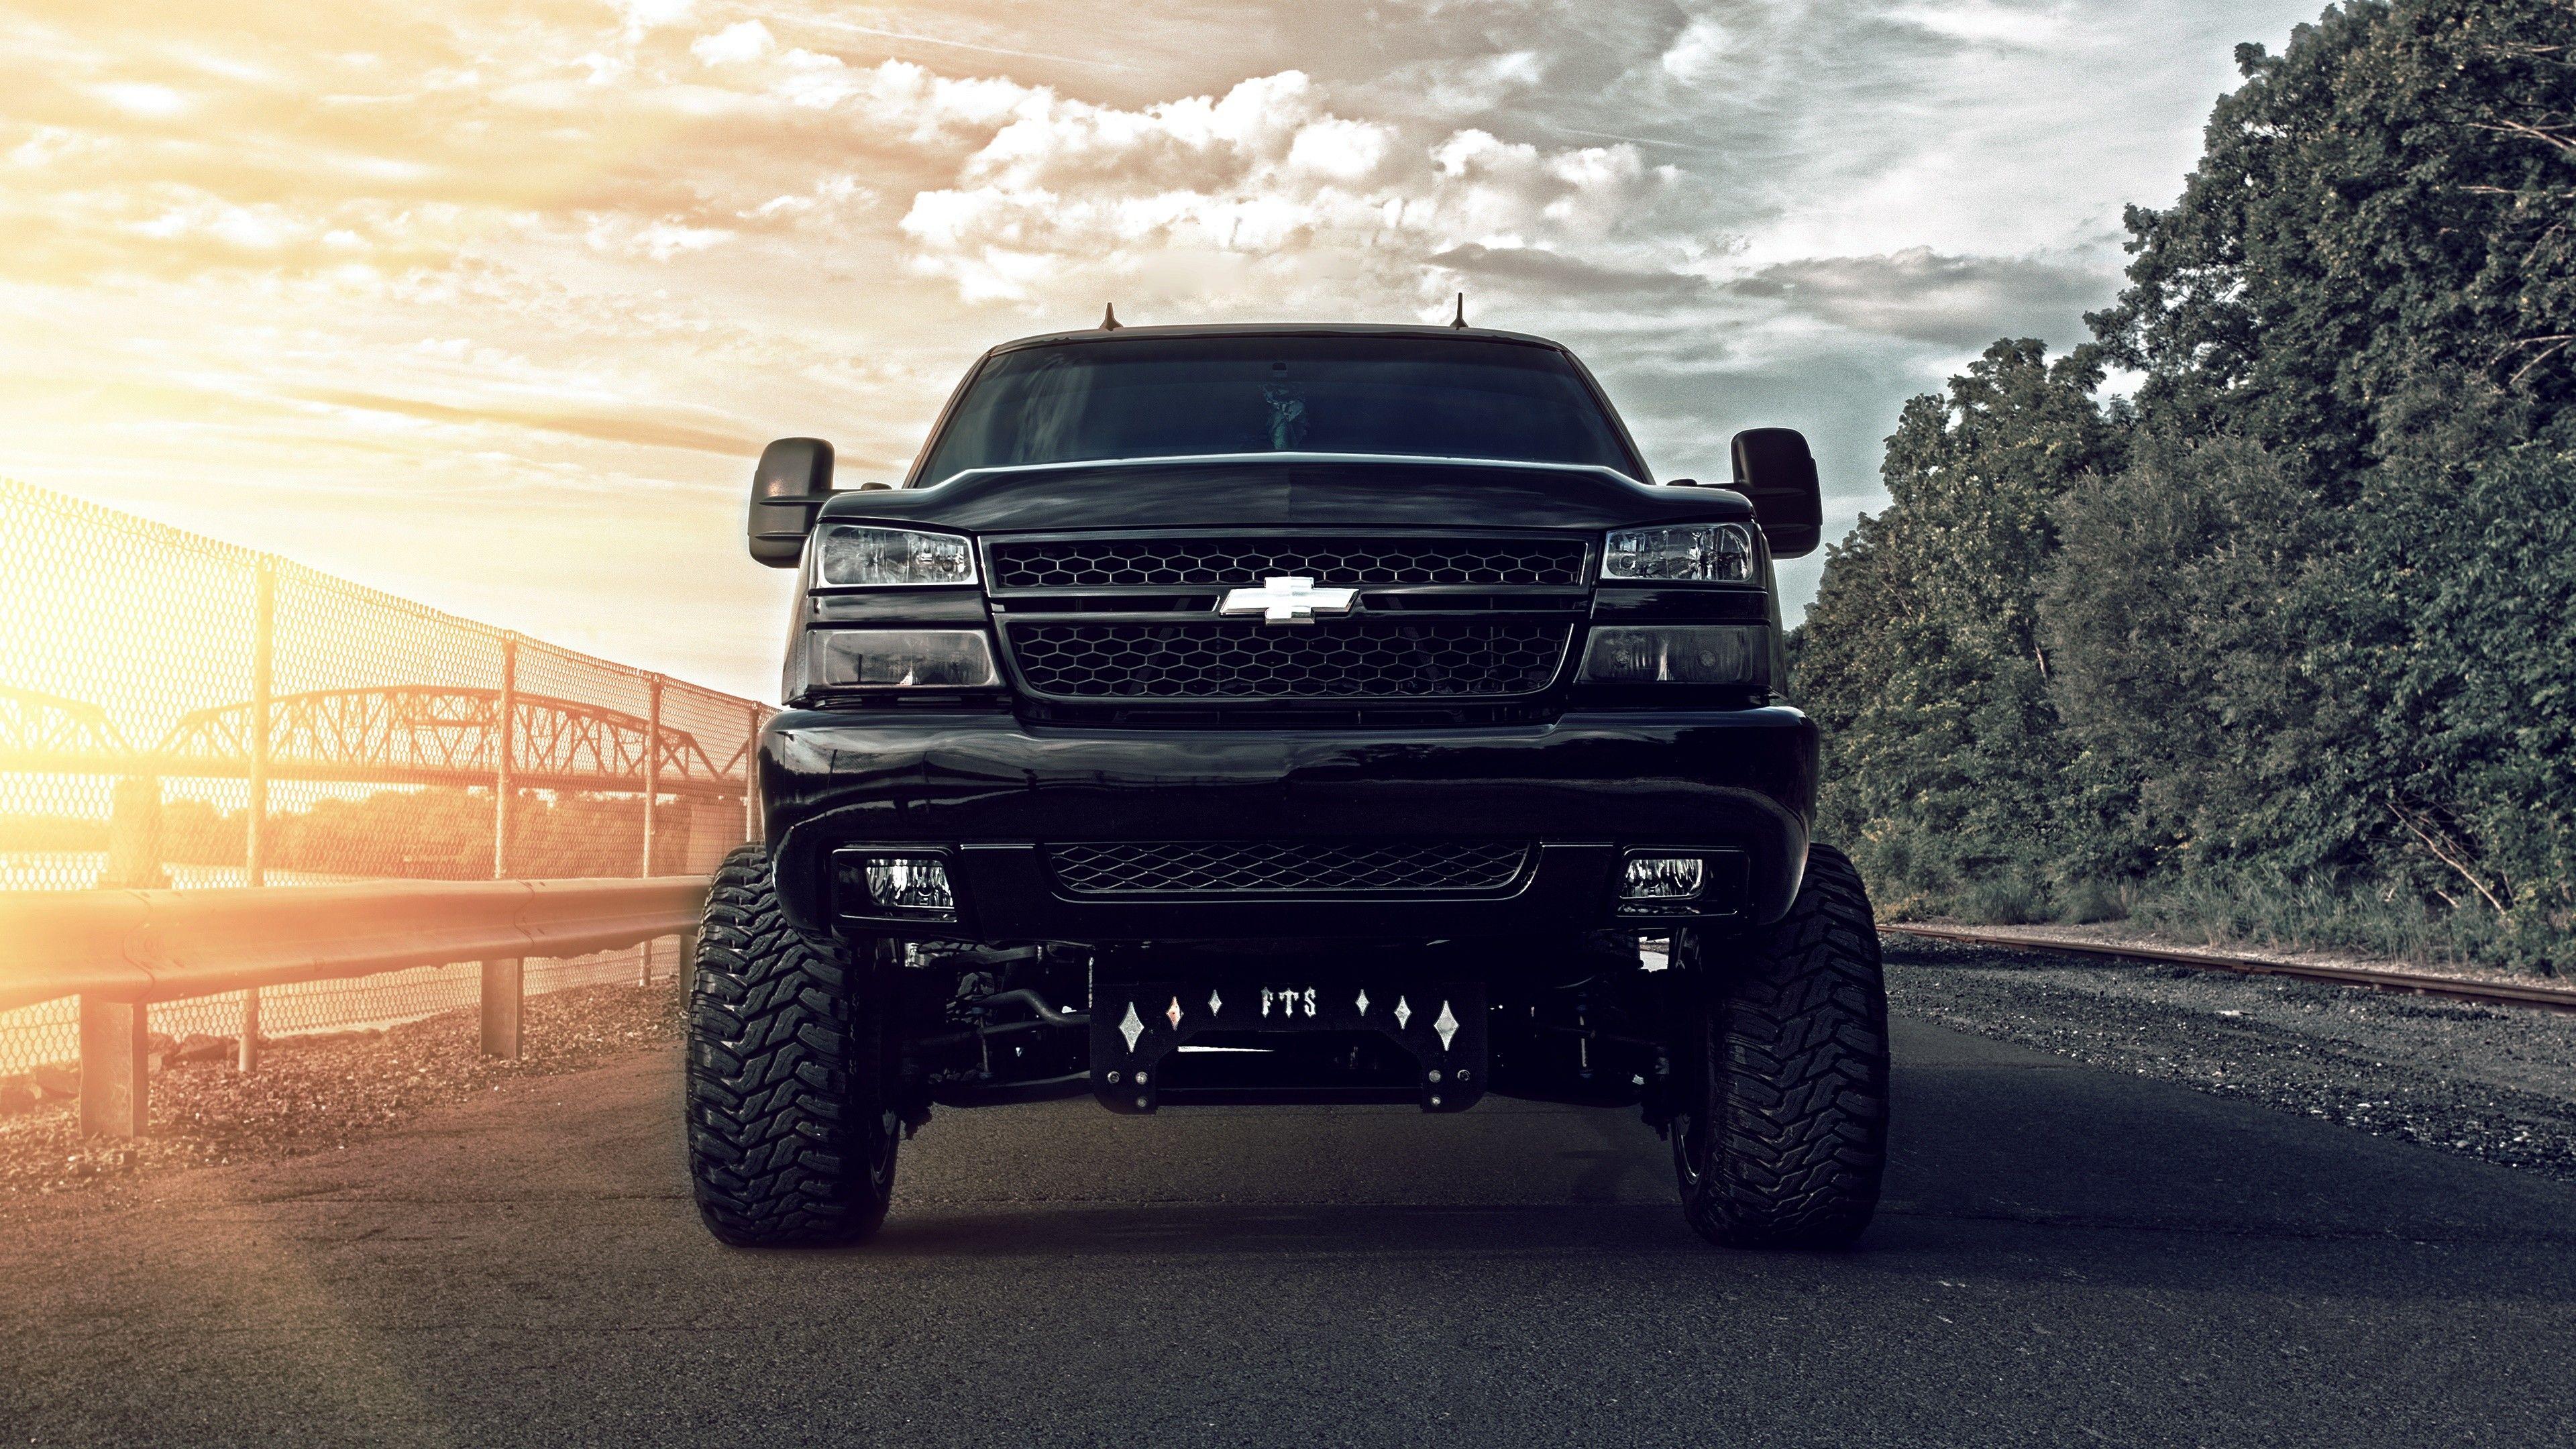 Lifted Truck Wallpapers Top Free Lifted Truck Backgrounds Wallpaperaccess